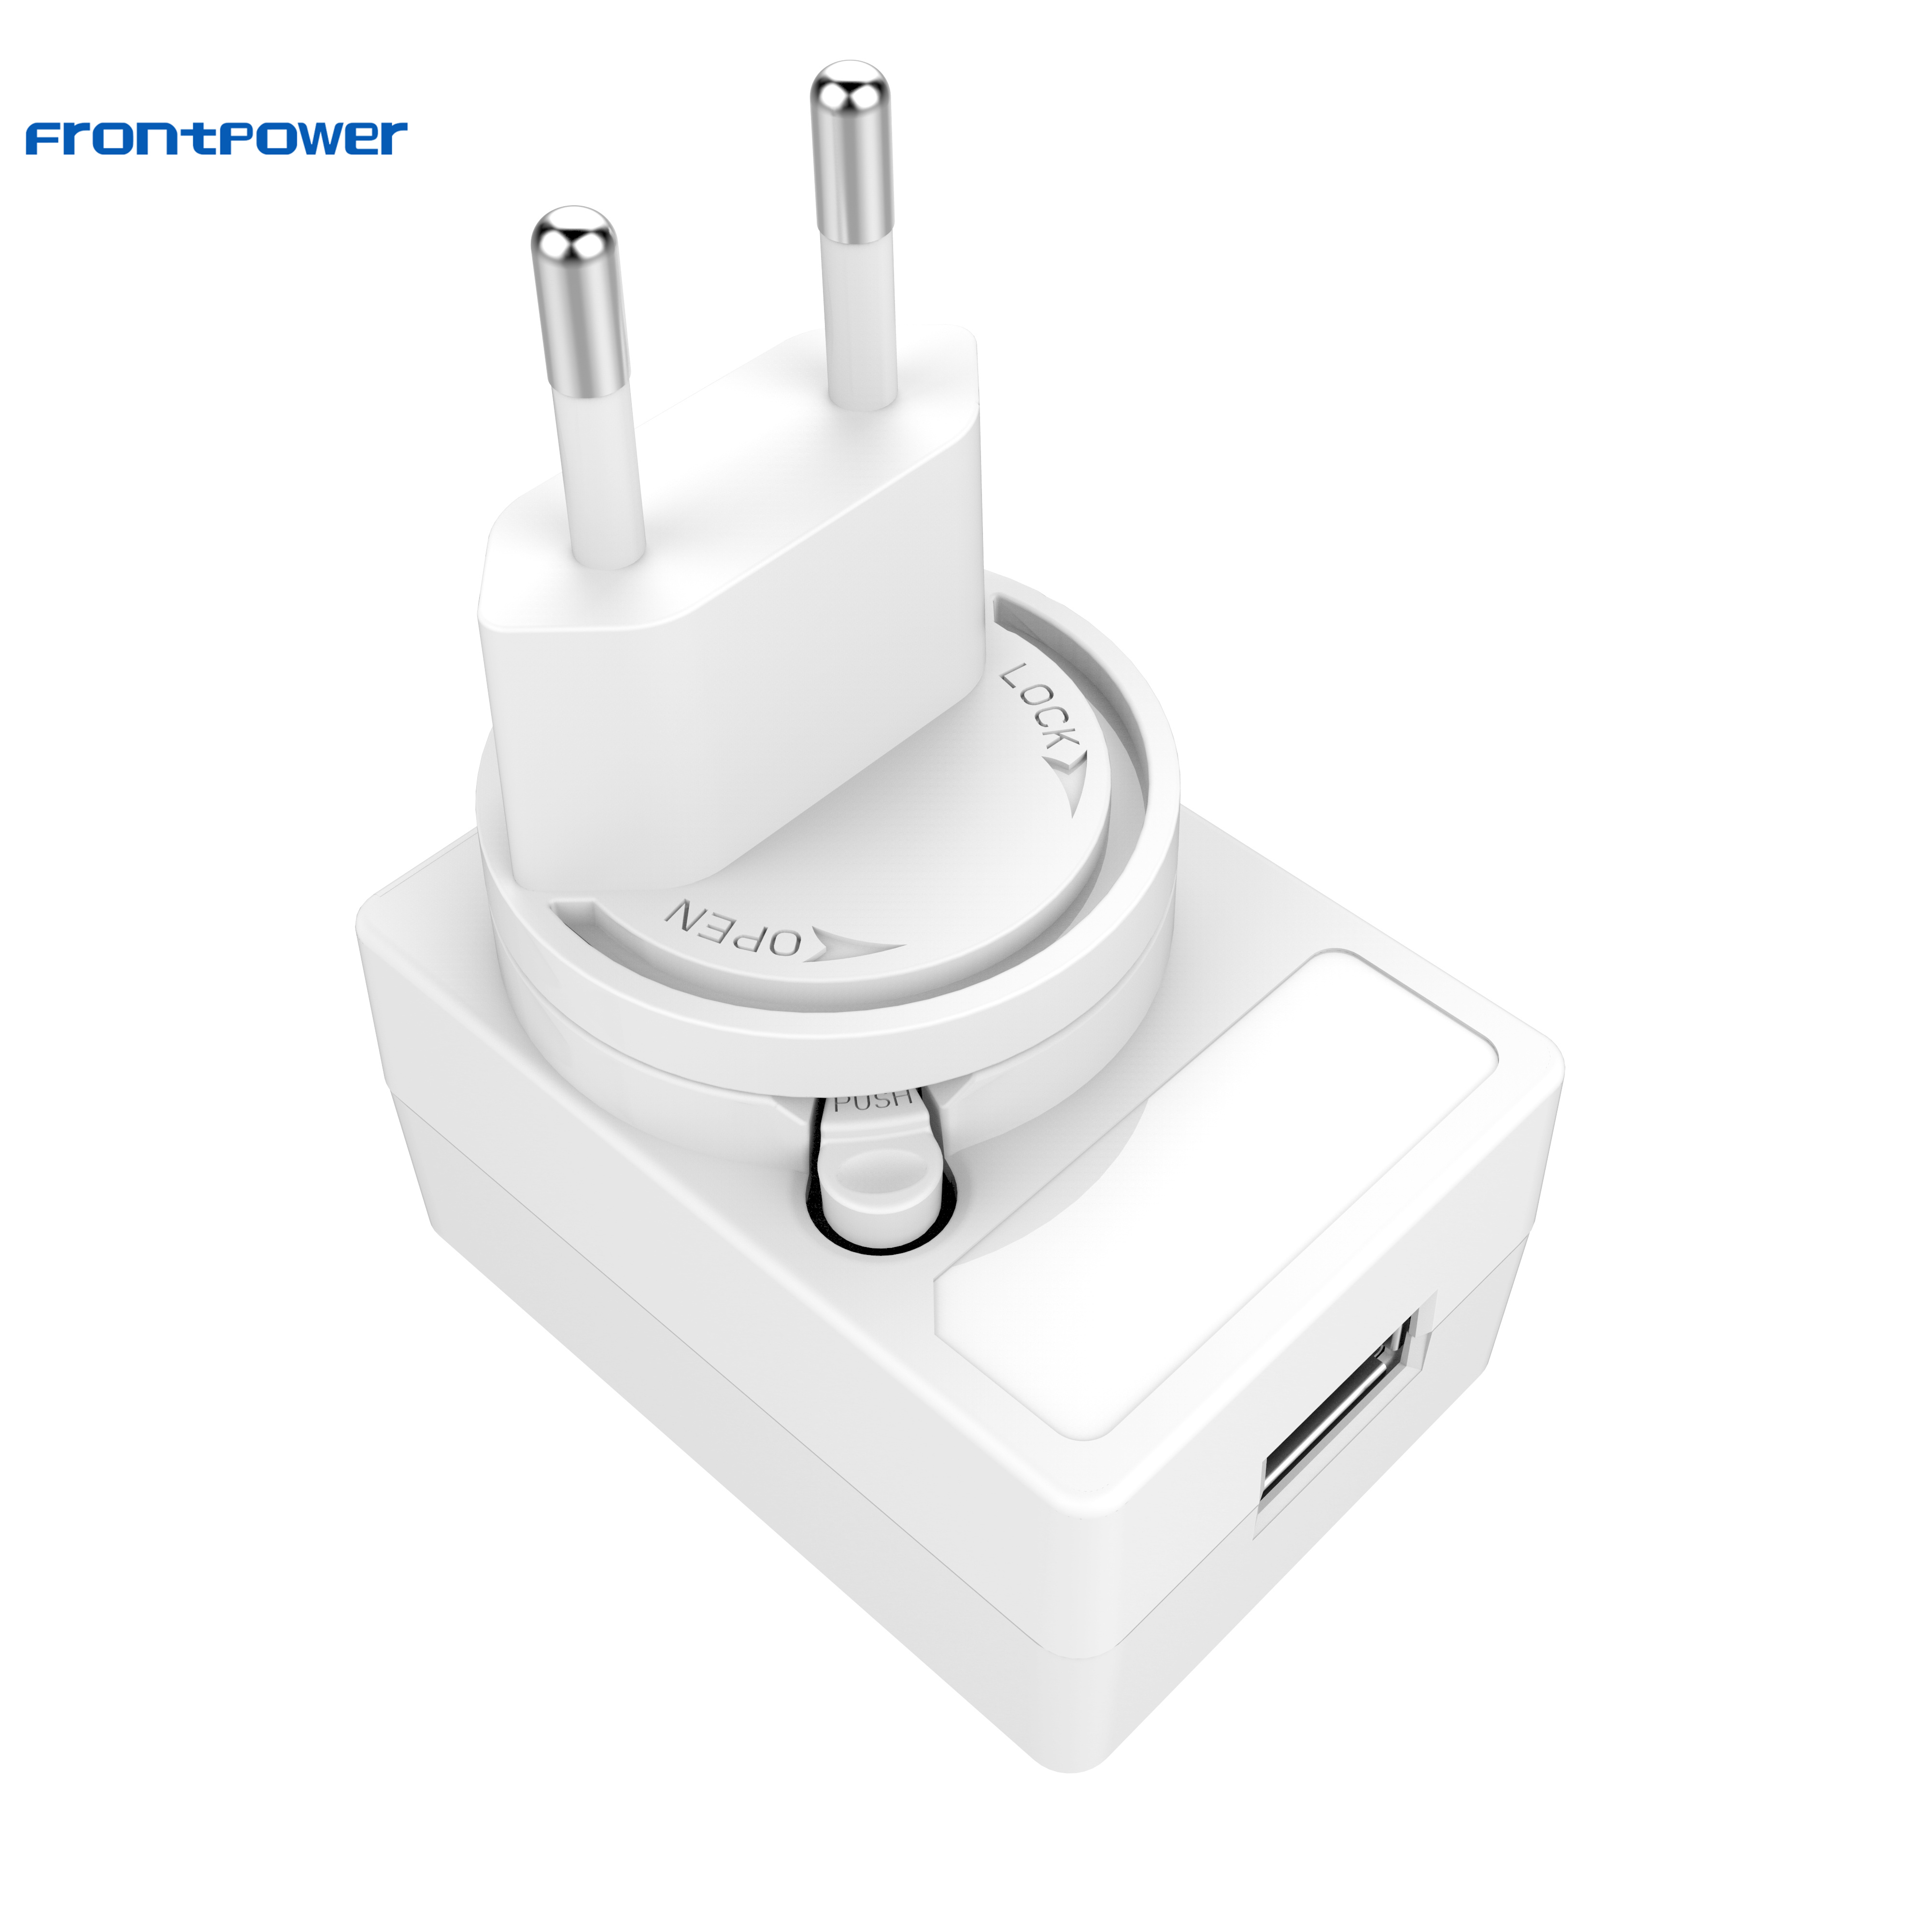 15W 5V 1A power adapter pro 5V 1.5A USB charger with UL CE GS UKCA SAA for mini head fan